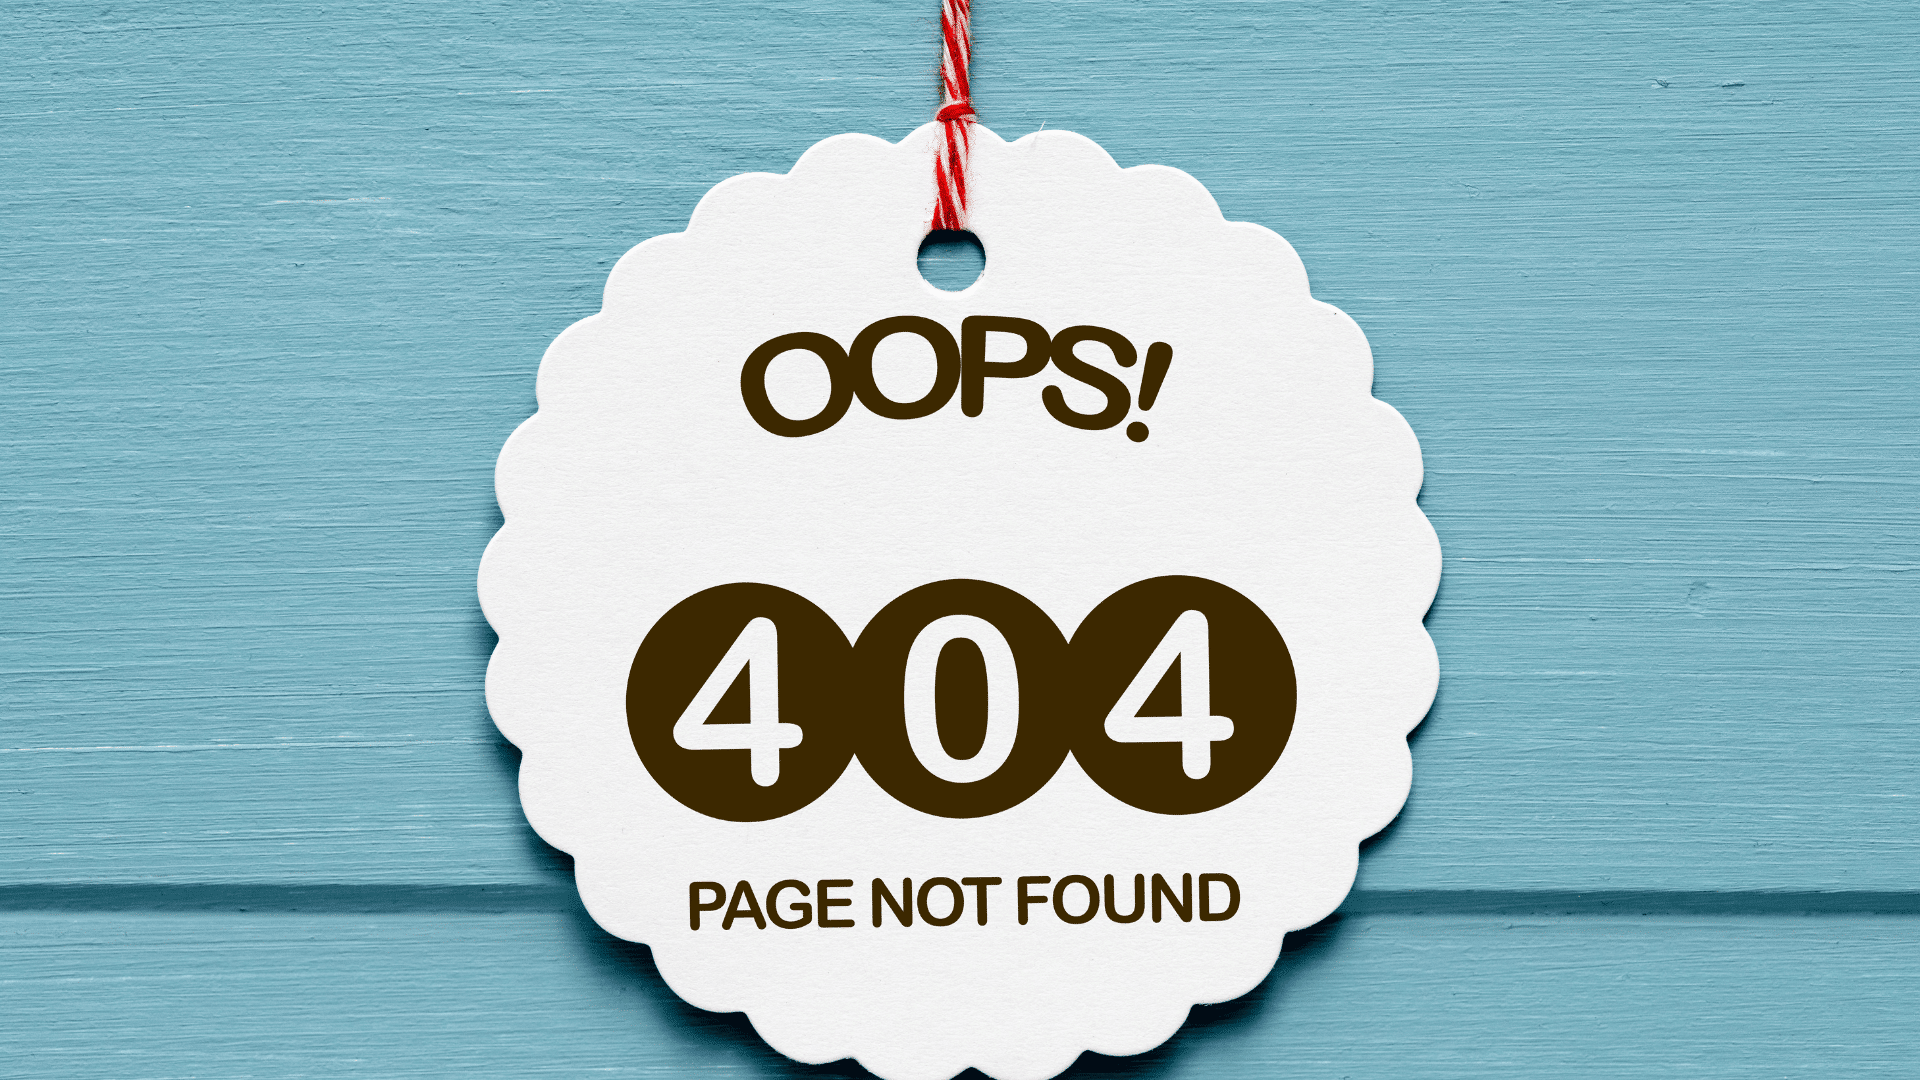 Scritta "Oops 404 Page Not Found"